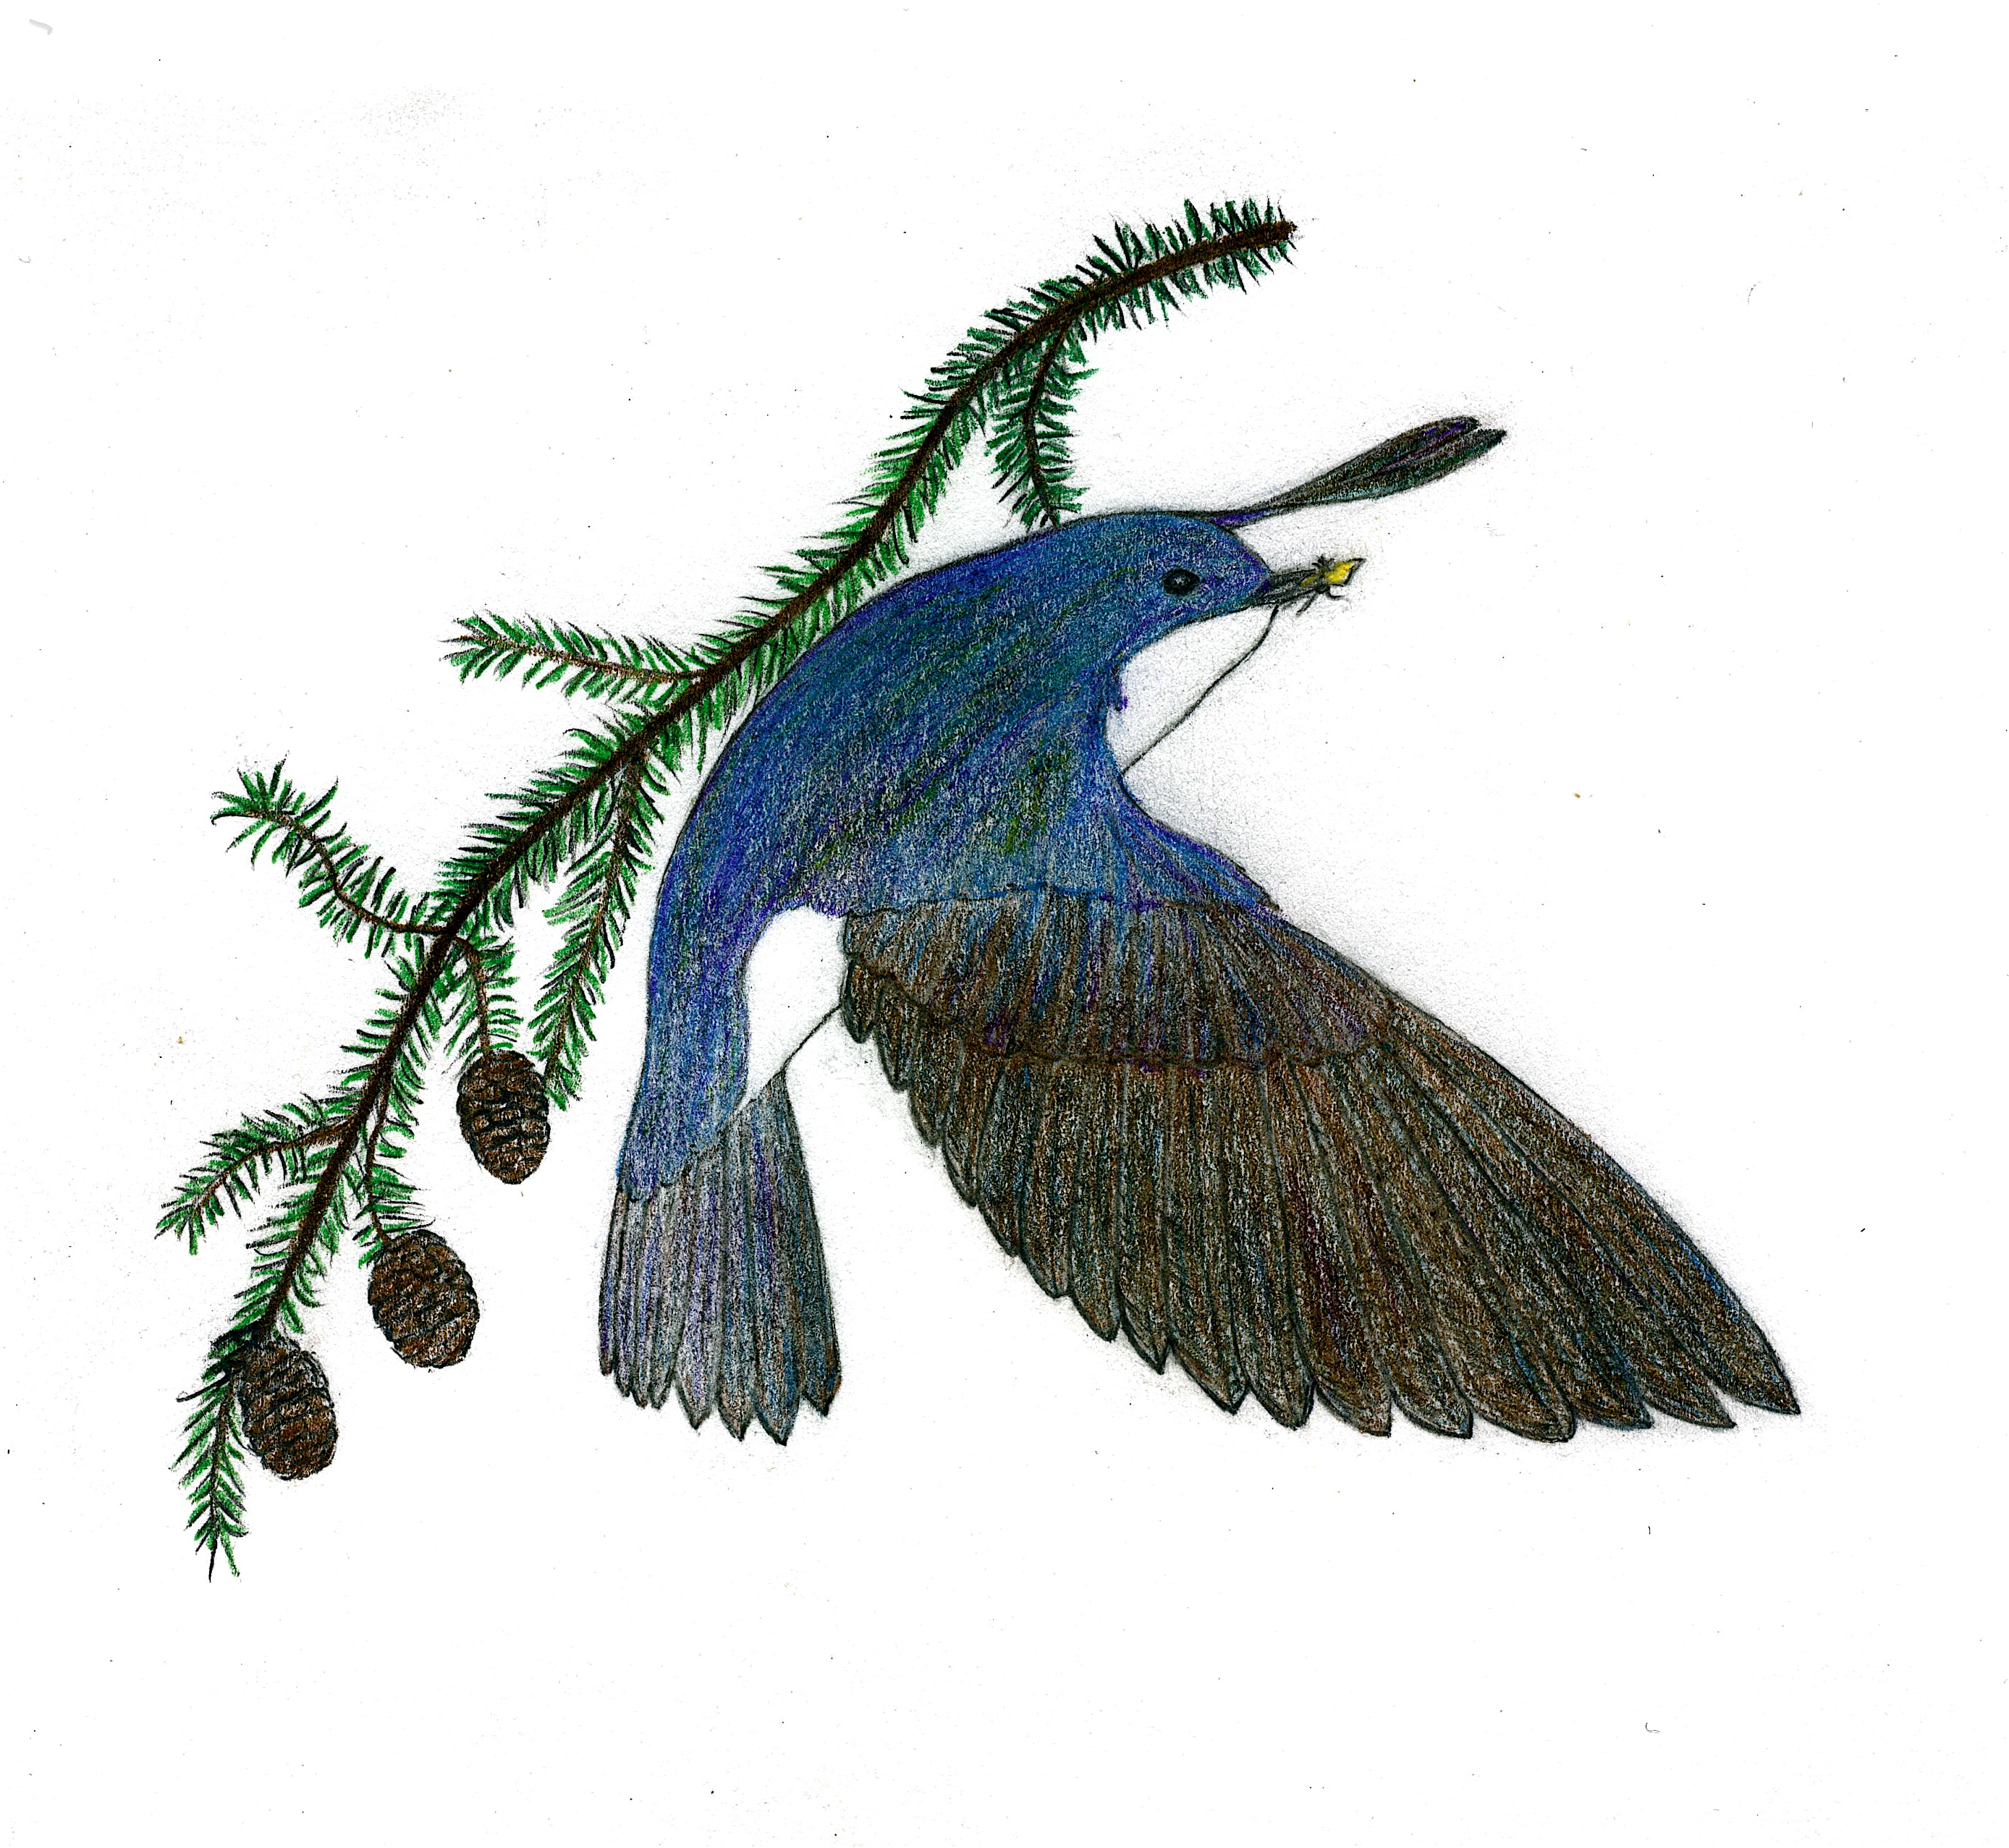 Illustration of a tree swallow with an insect in its beak and a tree branch with pine cones in the background